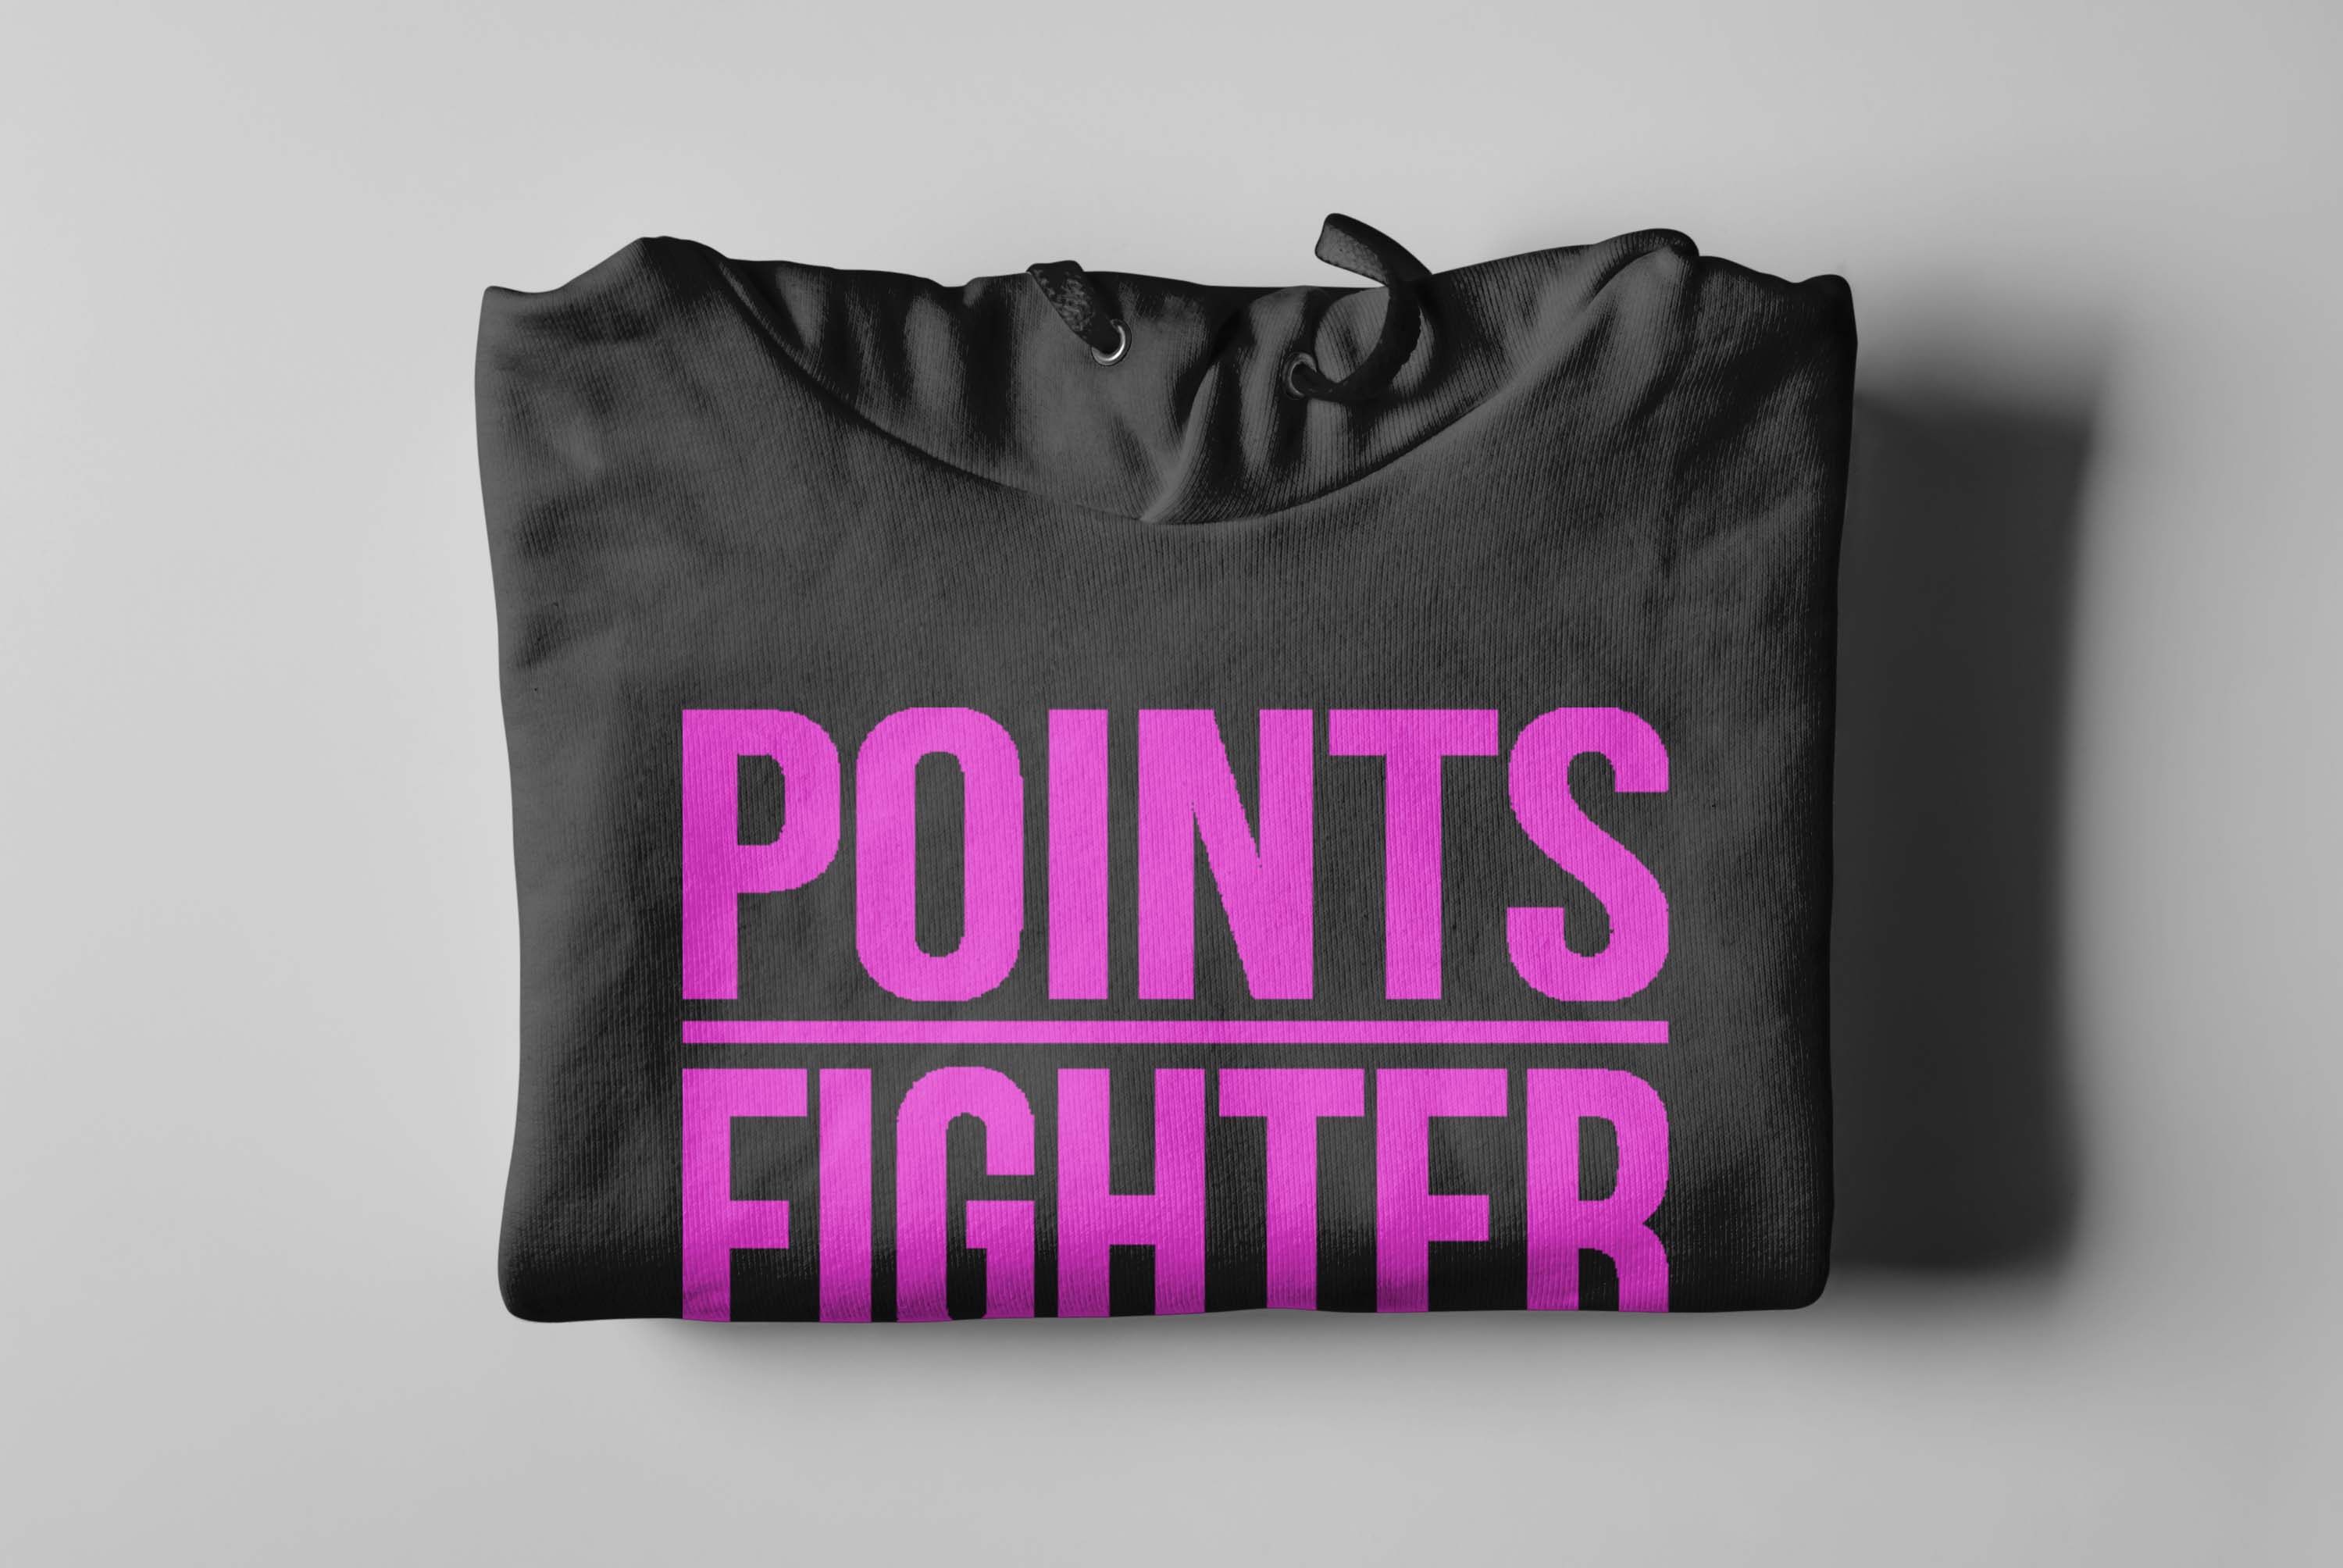 Points Fighter Hoodie - Neon Pink